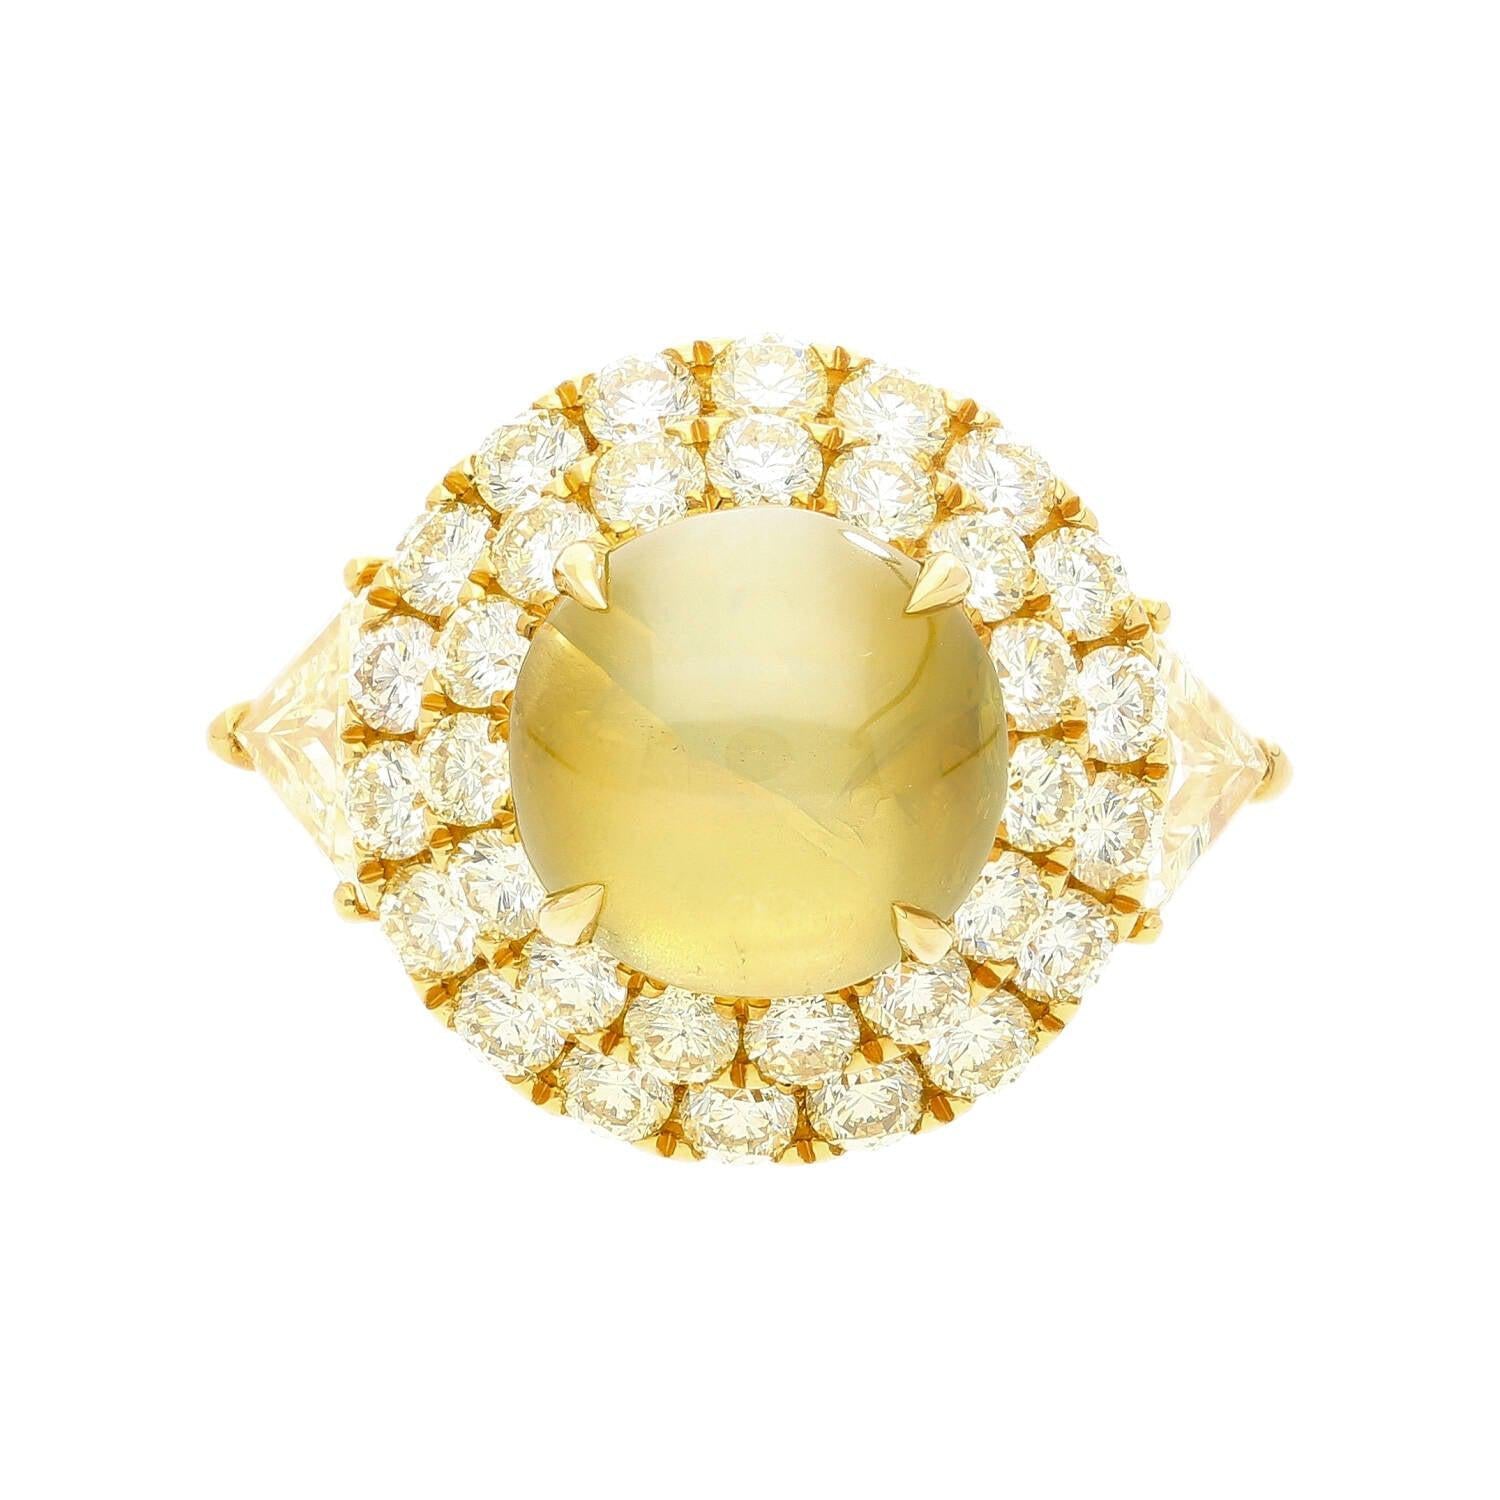 GRS-Certified-5-Carat-Untreated-Chrysoberyl-Cats-Eye-and-Double-Halo-Diamond-Ring-Rings.jpg